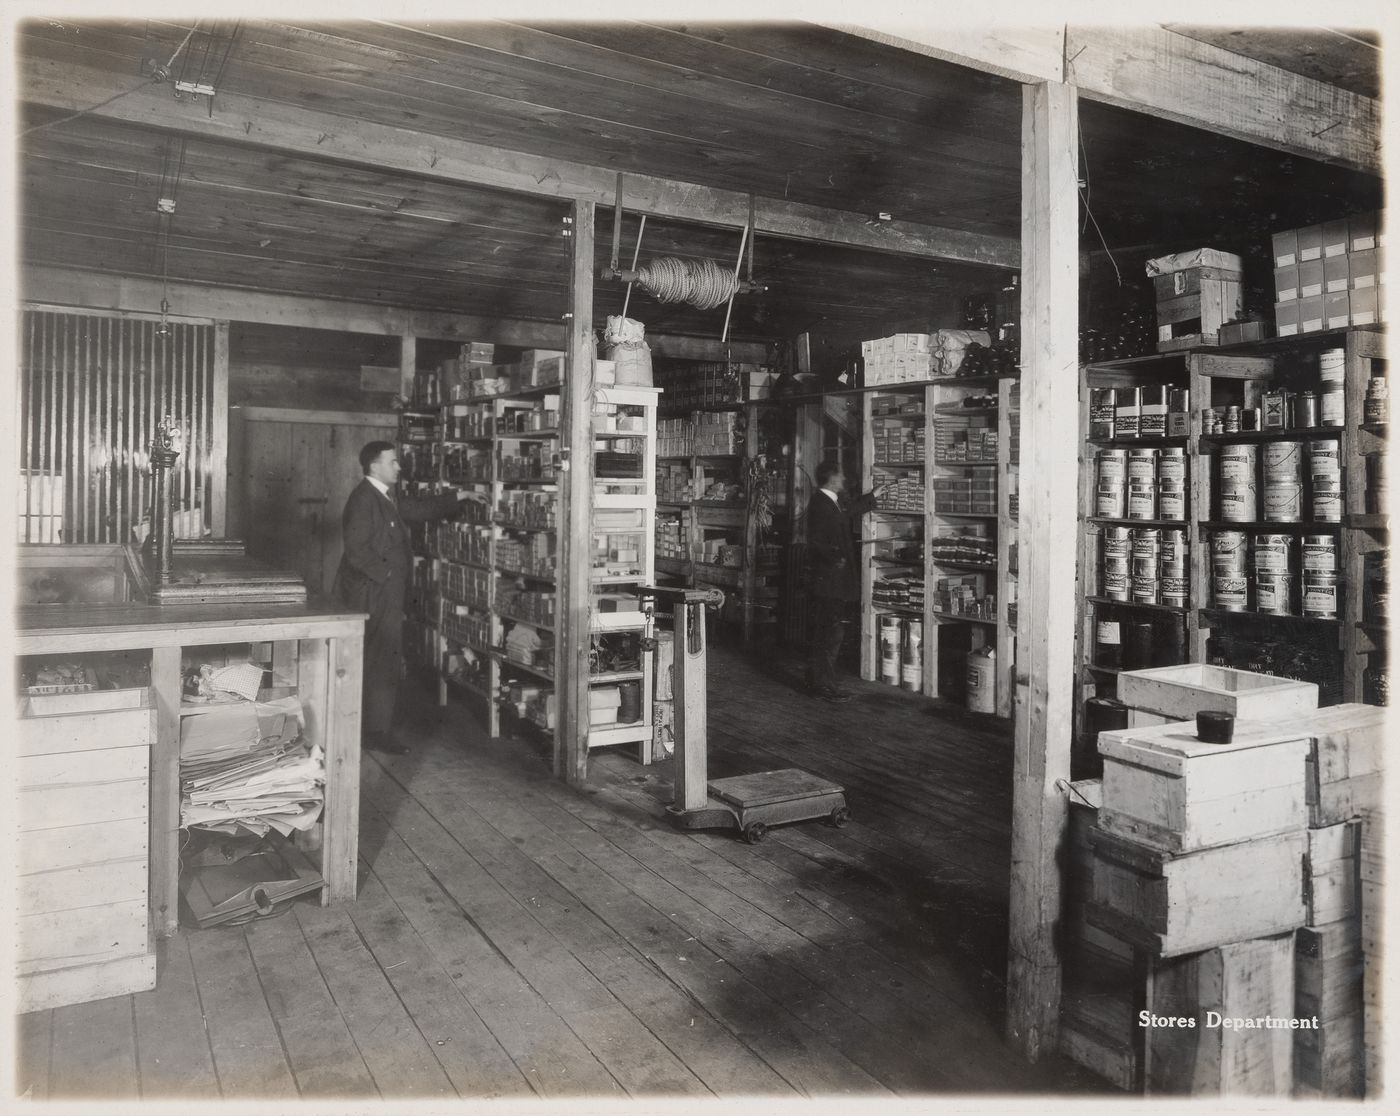 Interior view of stores department at the Energite Explosives Plant No. 3, the Shell Loading Plant, Renfrew, Ontario, Canada